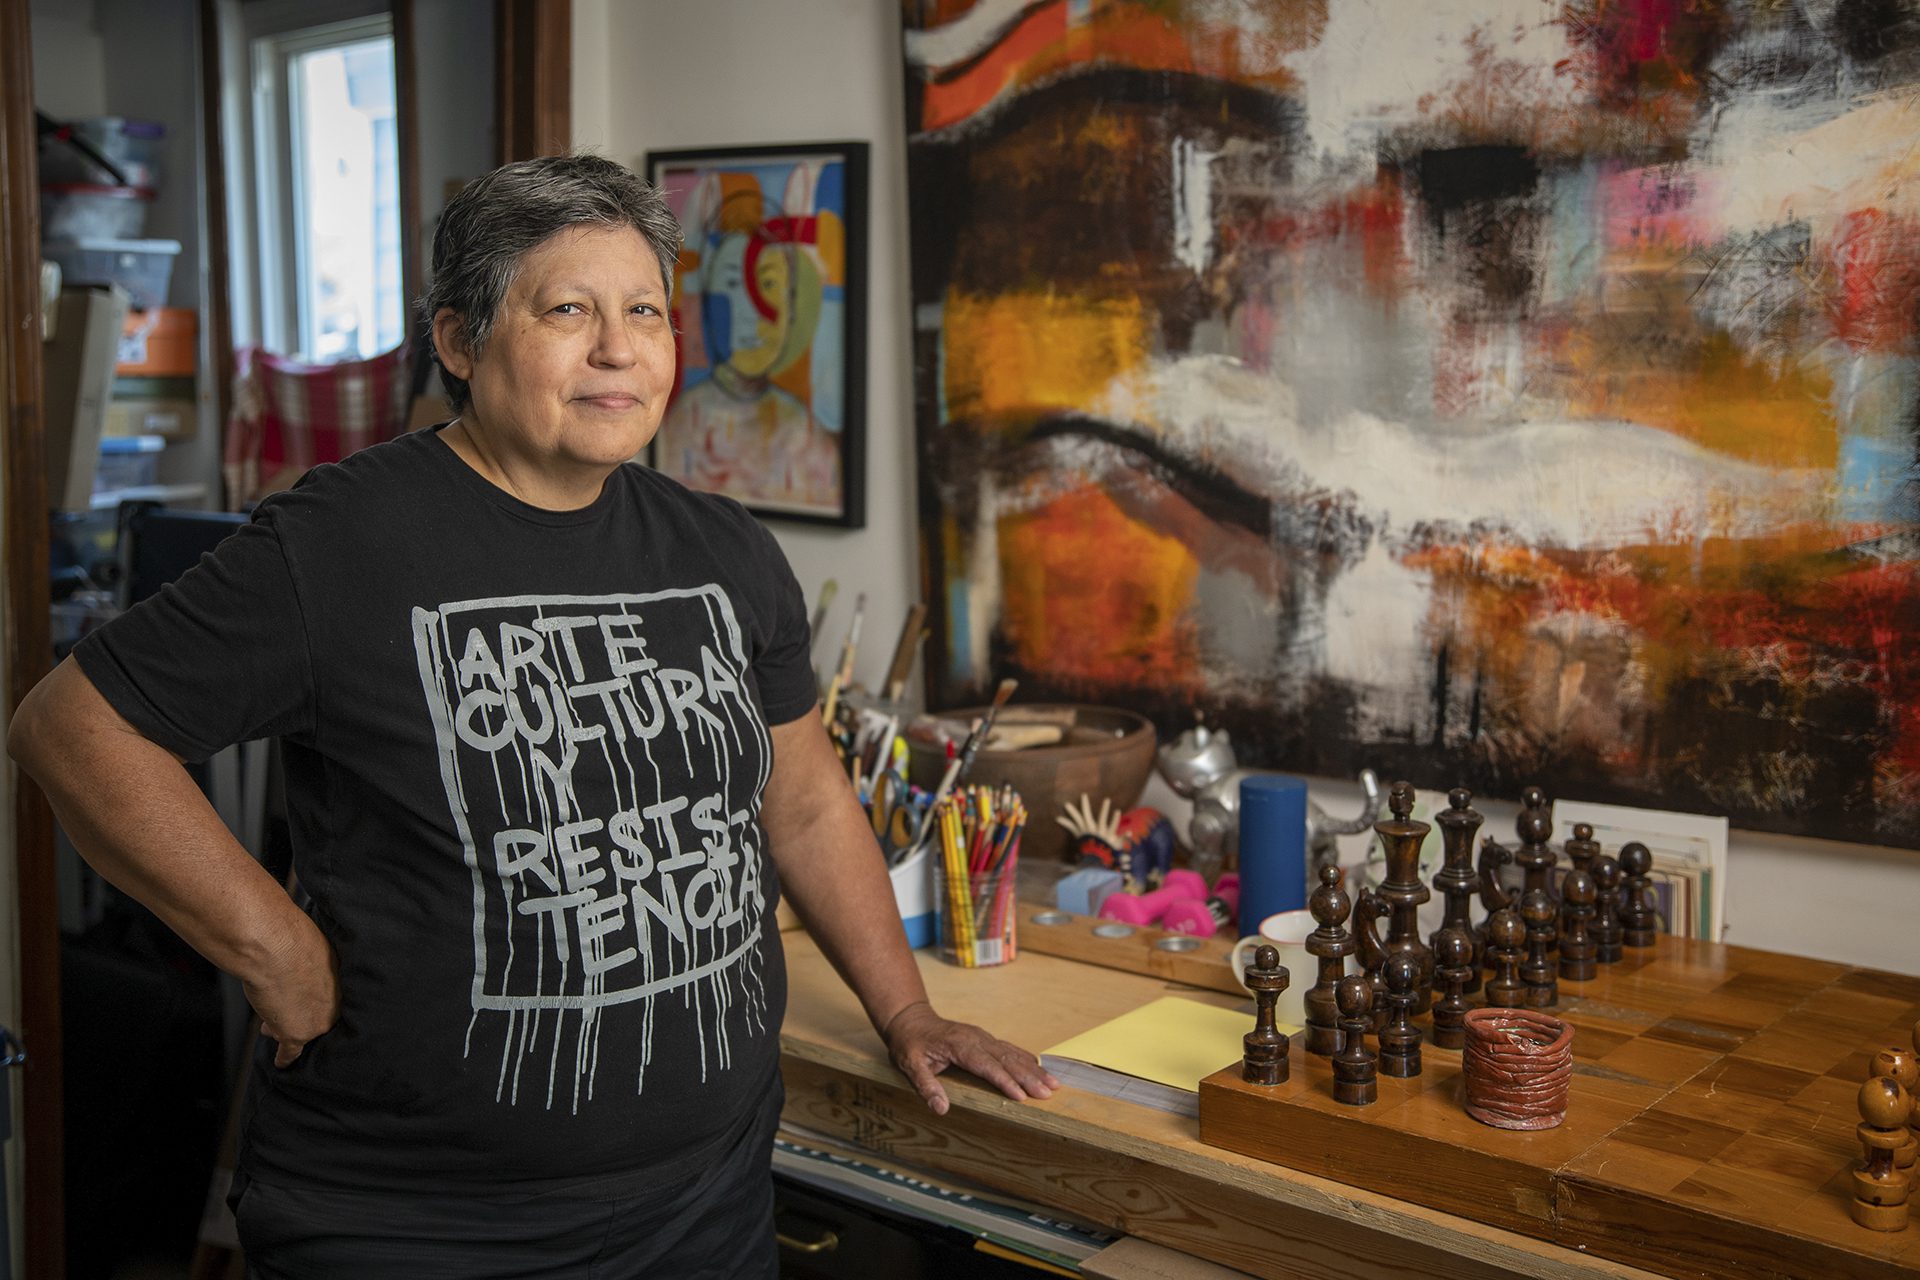 Diana Solis in her home with paintings and chess set